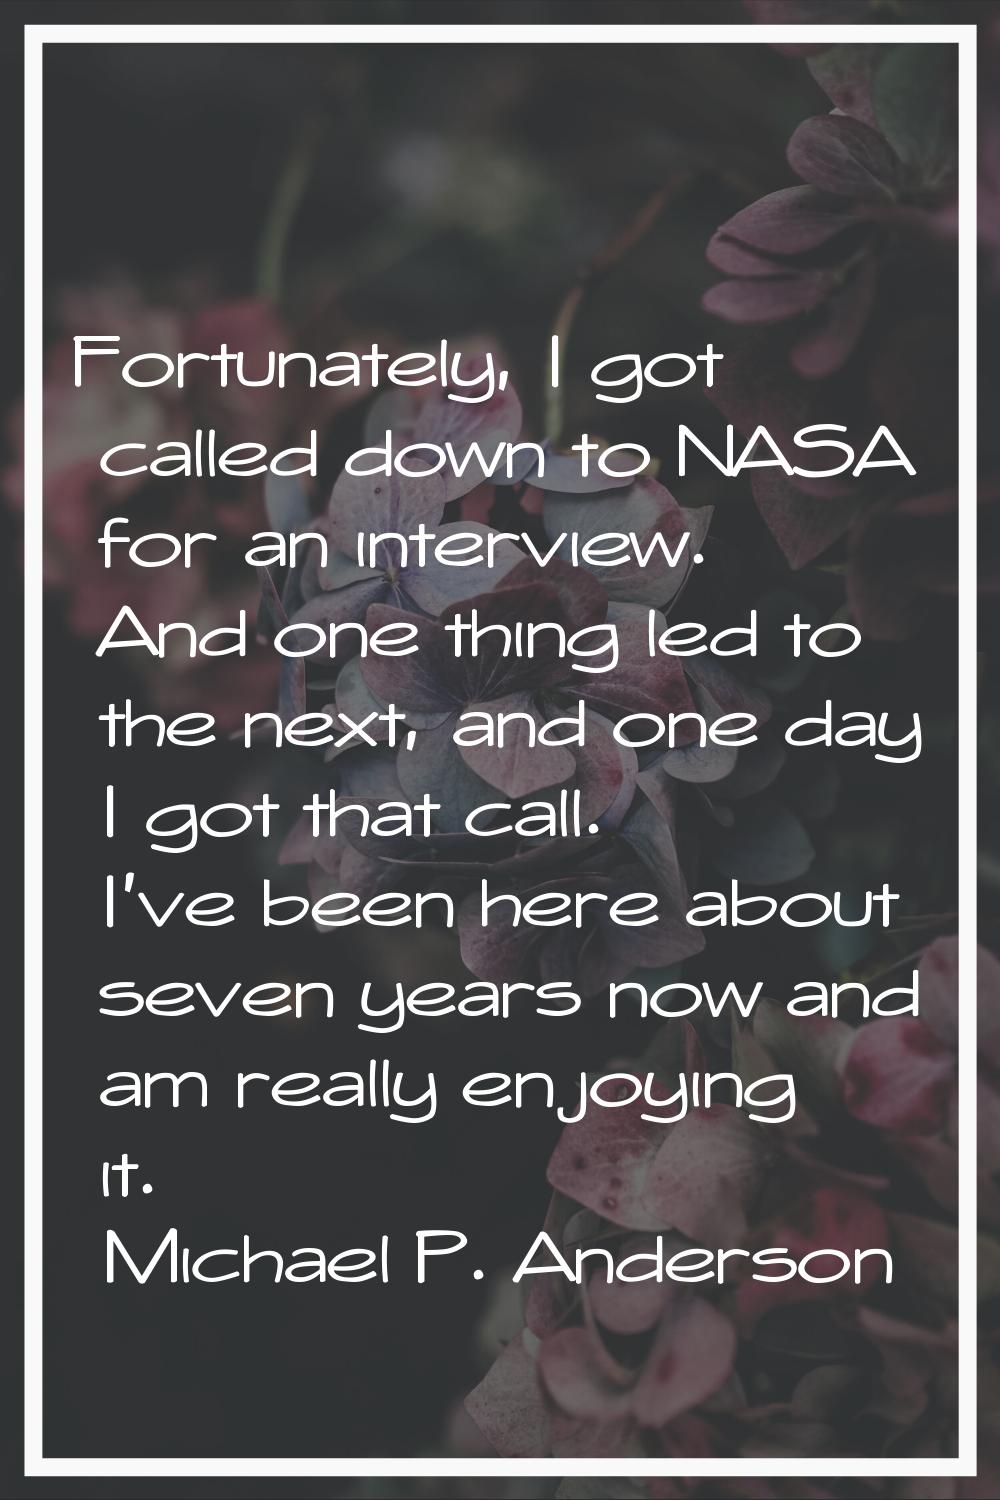 Fortunately, I got called down to NASA for an interview. And one thing led to the next, and one day